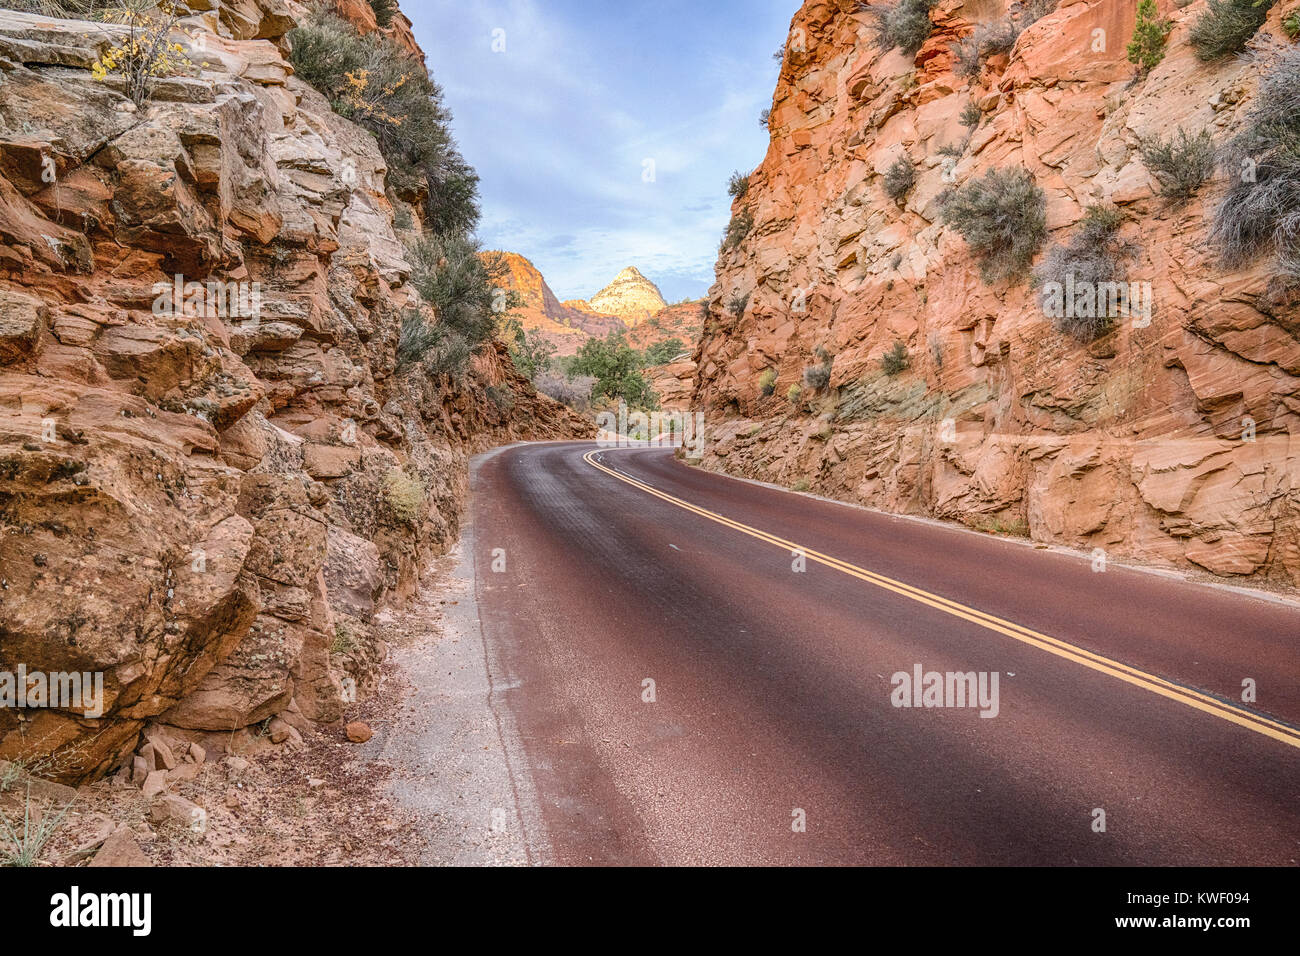 Winding road through the beautiful red rock formations of Zion National Park, Utah Stock Photo